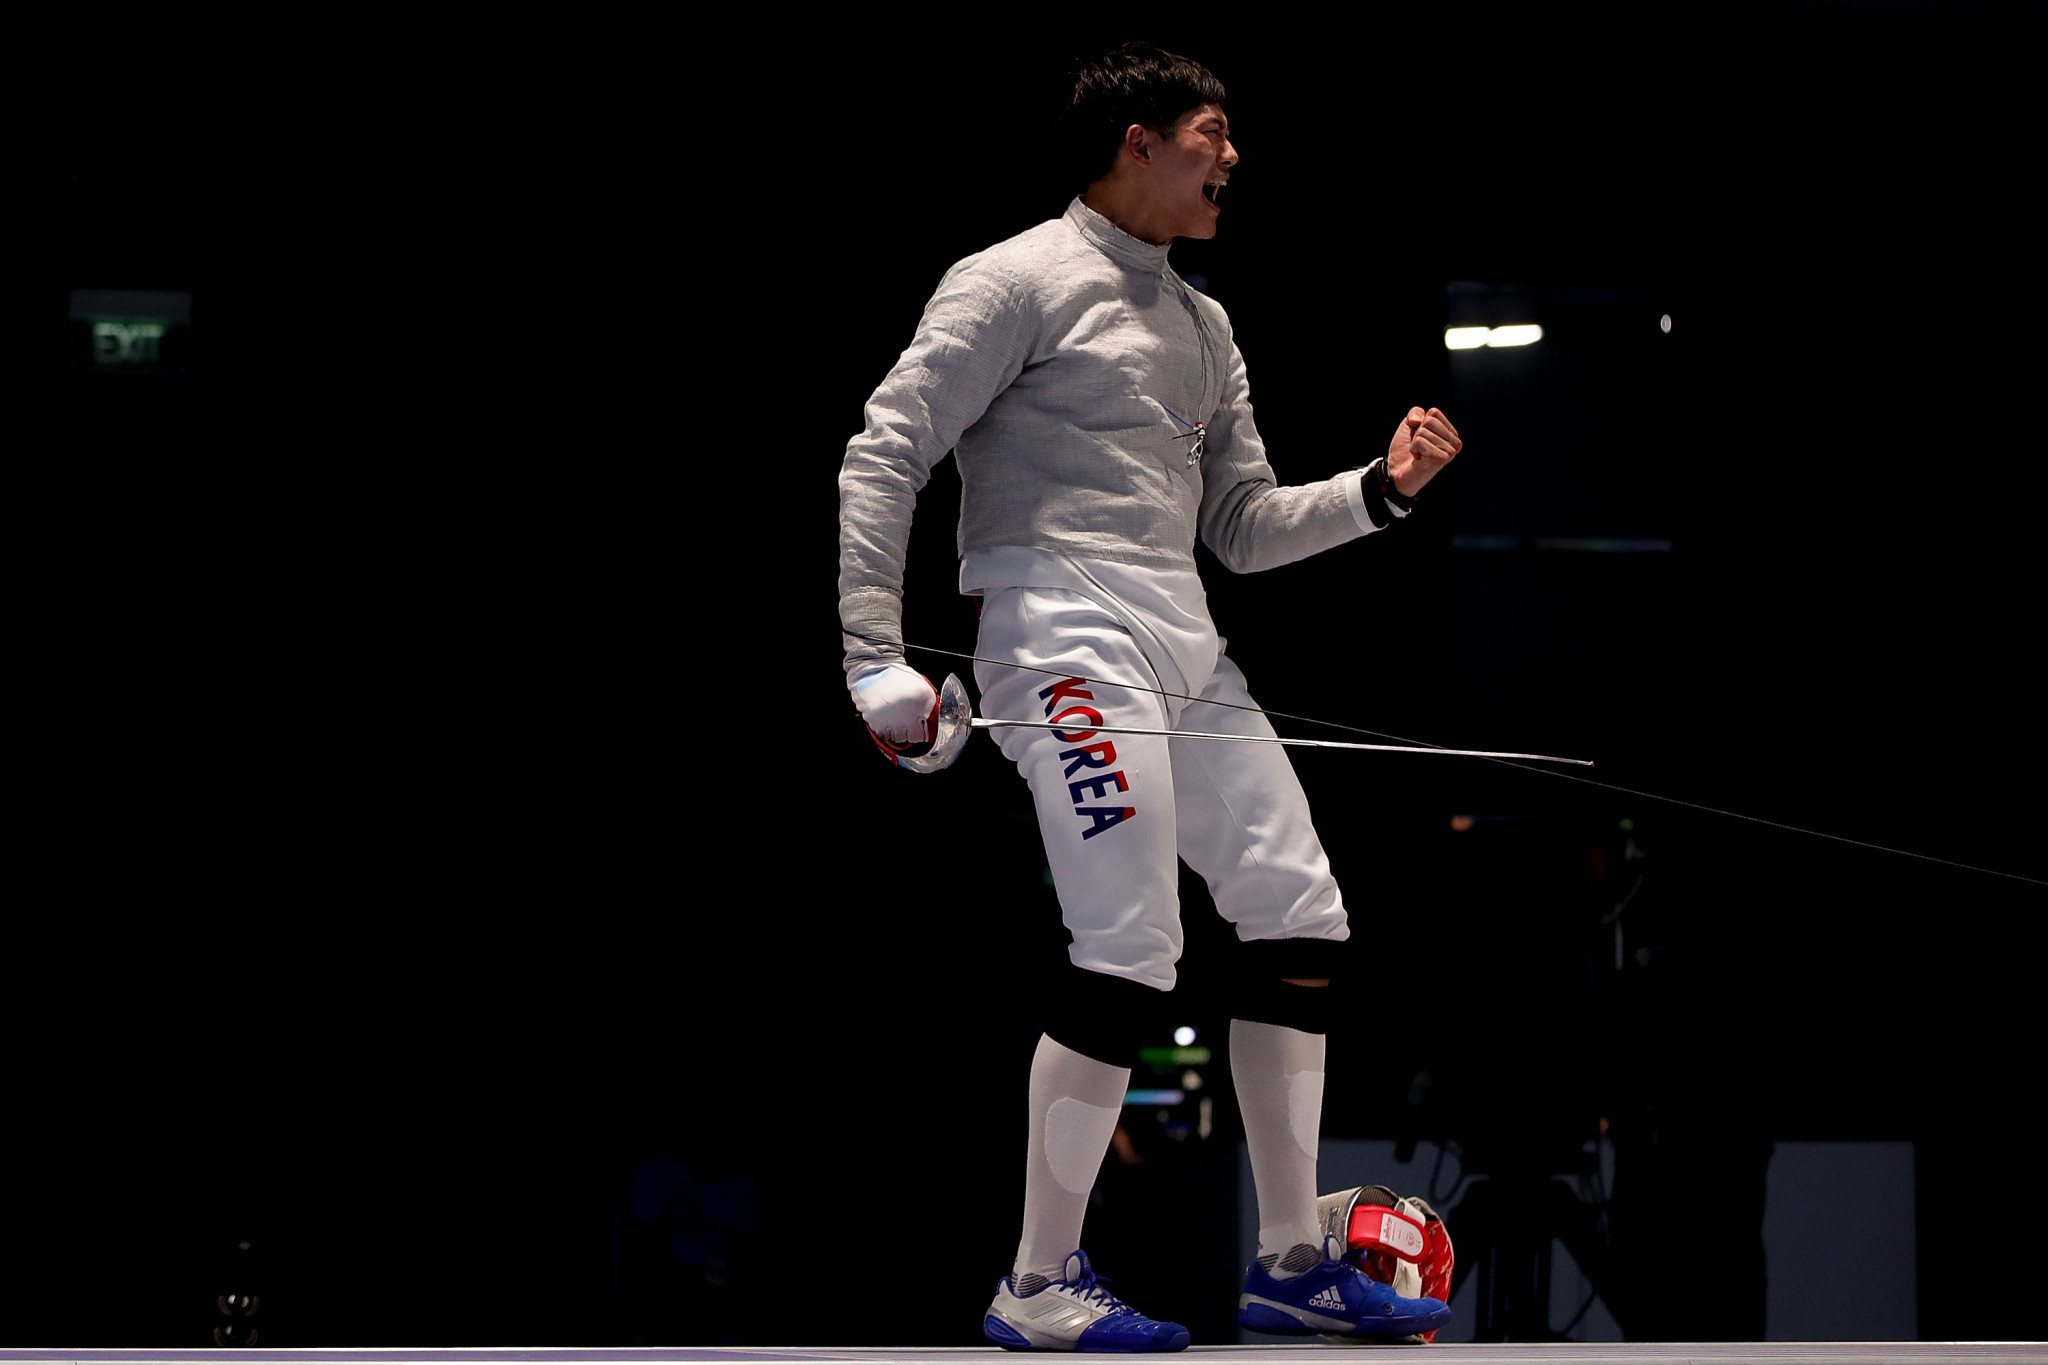 Oh Sang-uk of South Korea earned a Naples 2019 Summer Universiade gold medal after triumphing in the men's sabre final ©Getty Images